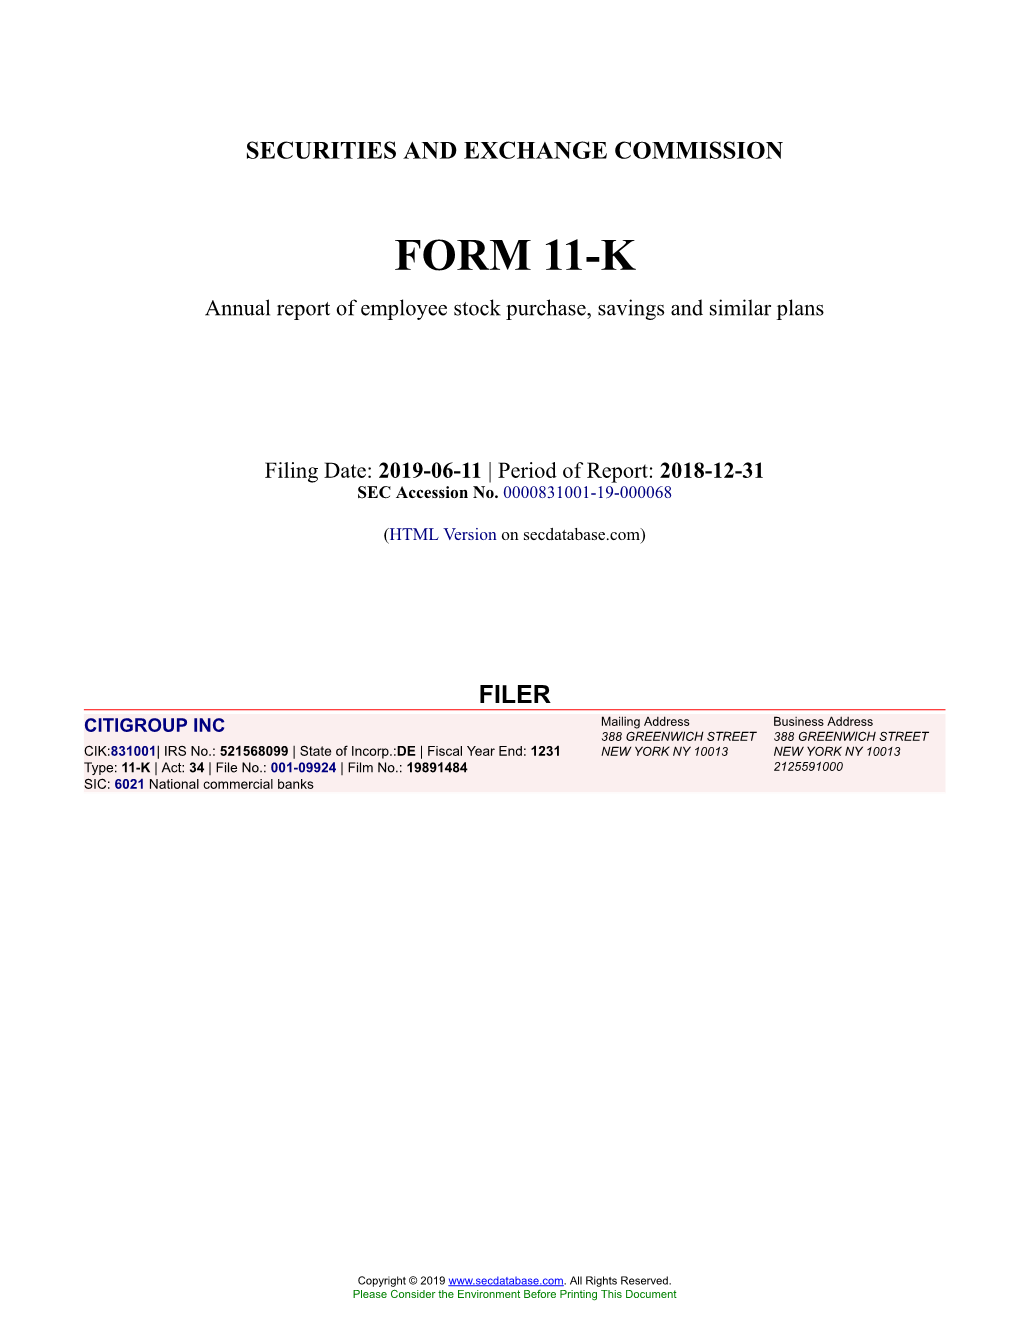 CITIGROUP INC Form 11-K Annual Report Filed 2019-06-11